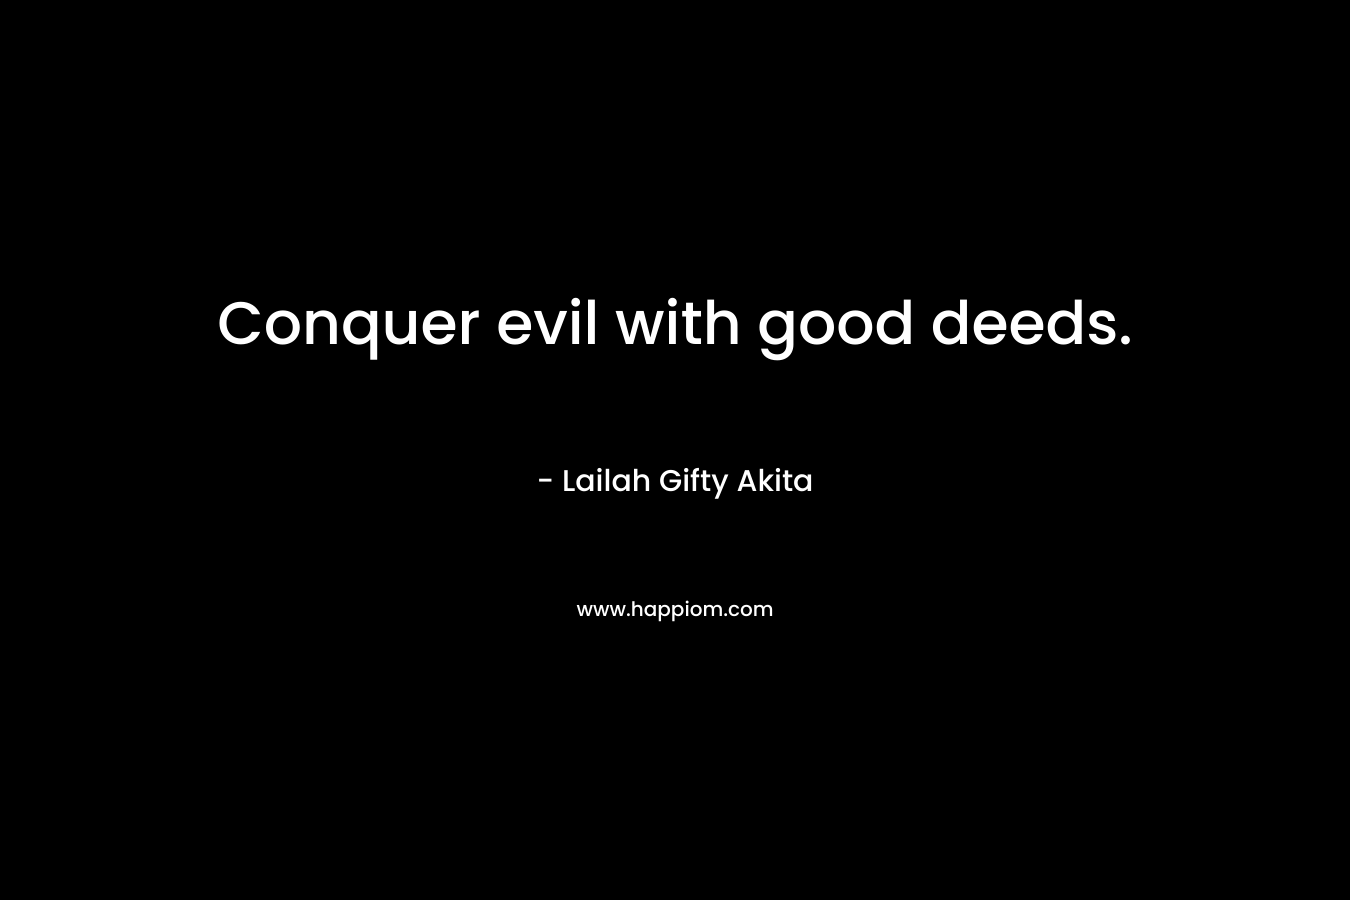 Conquer evil with good deeds. – Lailah Gifty Akita